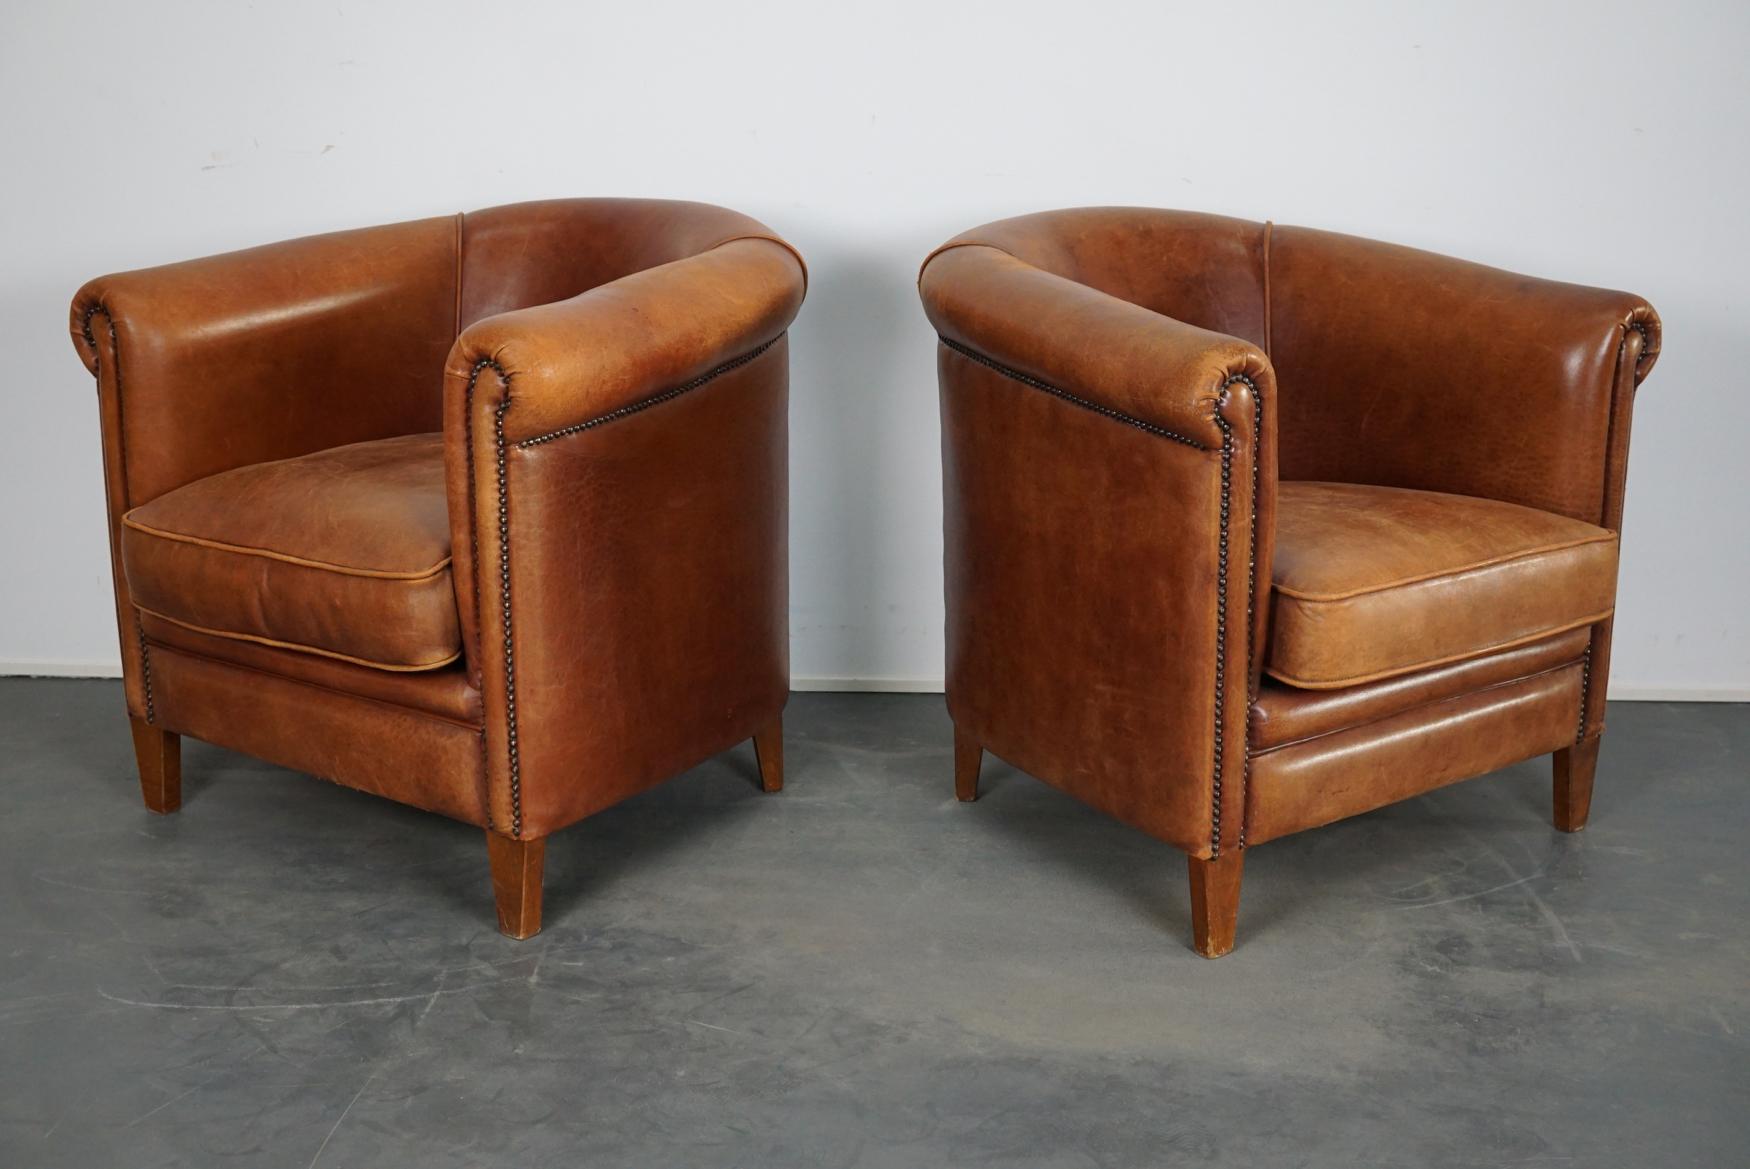 This pair of cognac-colored leather club chairs come from the Netherlands. They are upholstered with cognac-colored leather and feature metal rivets and wooden legs.
           